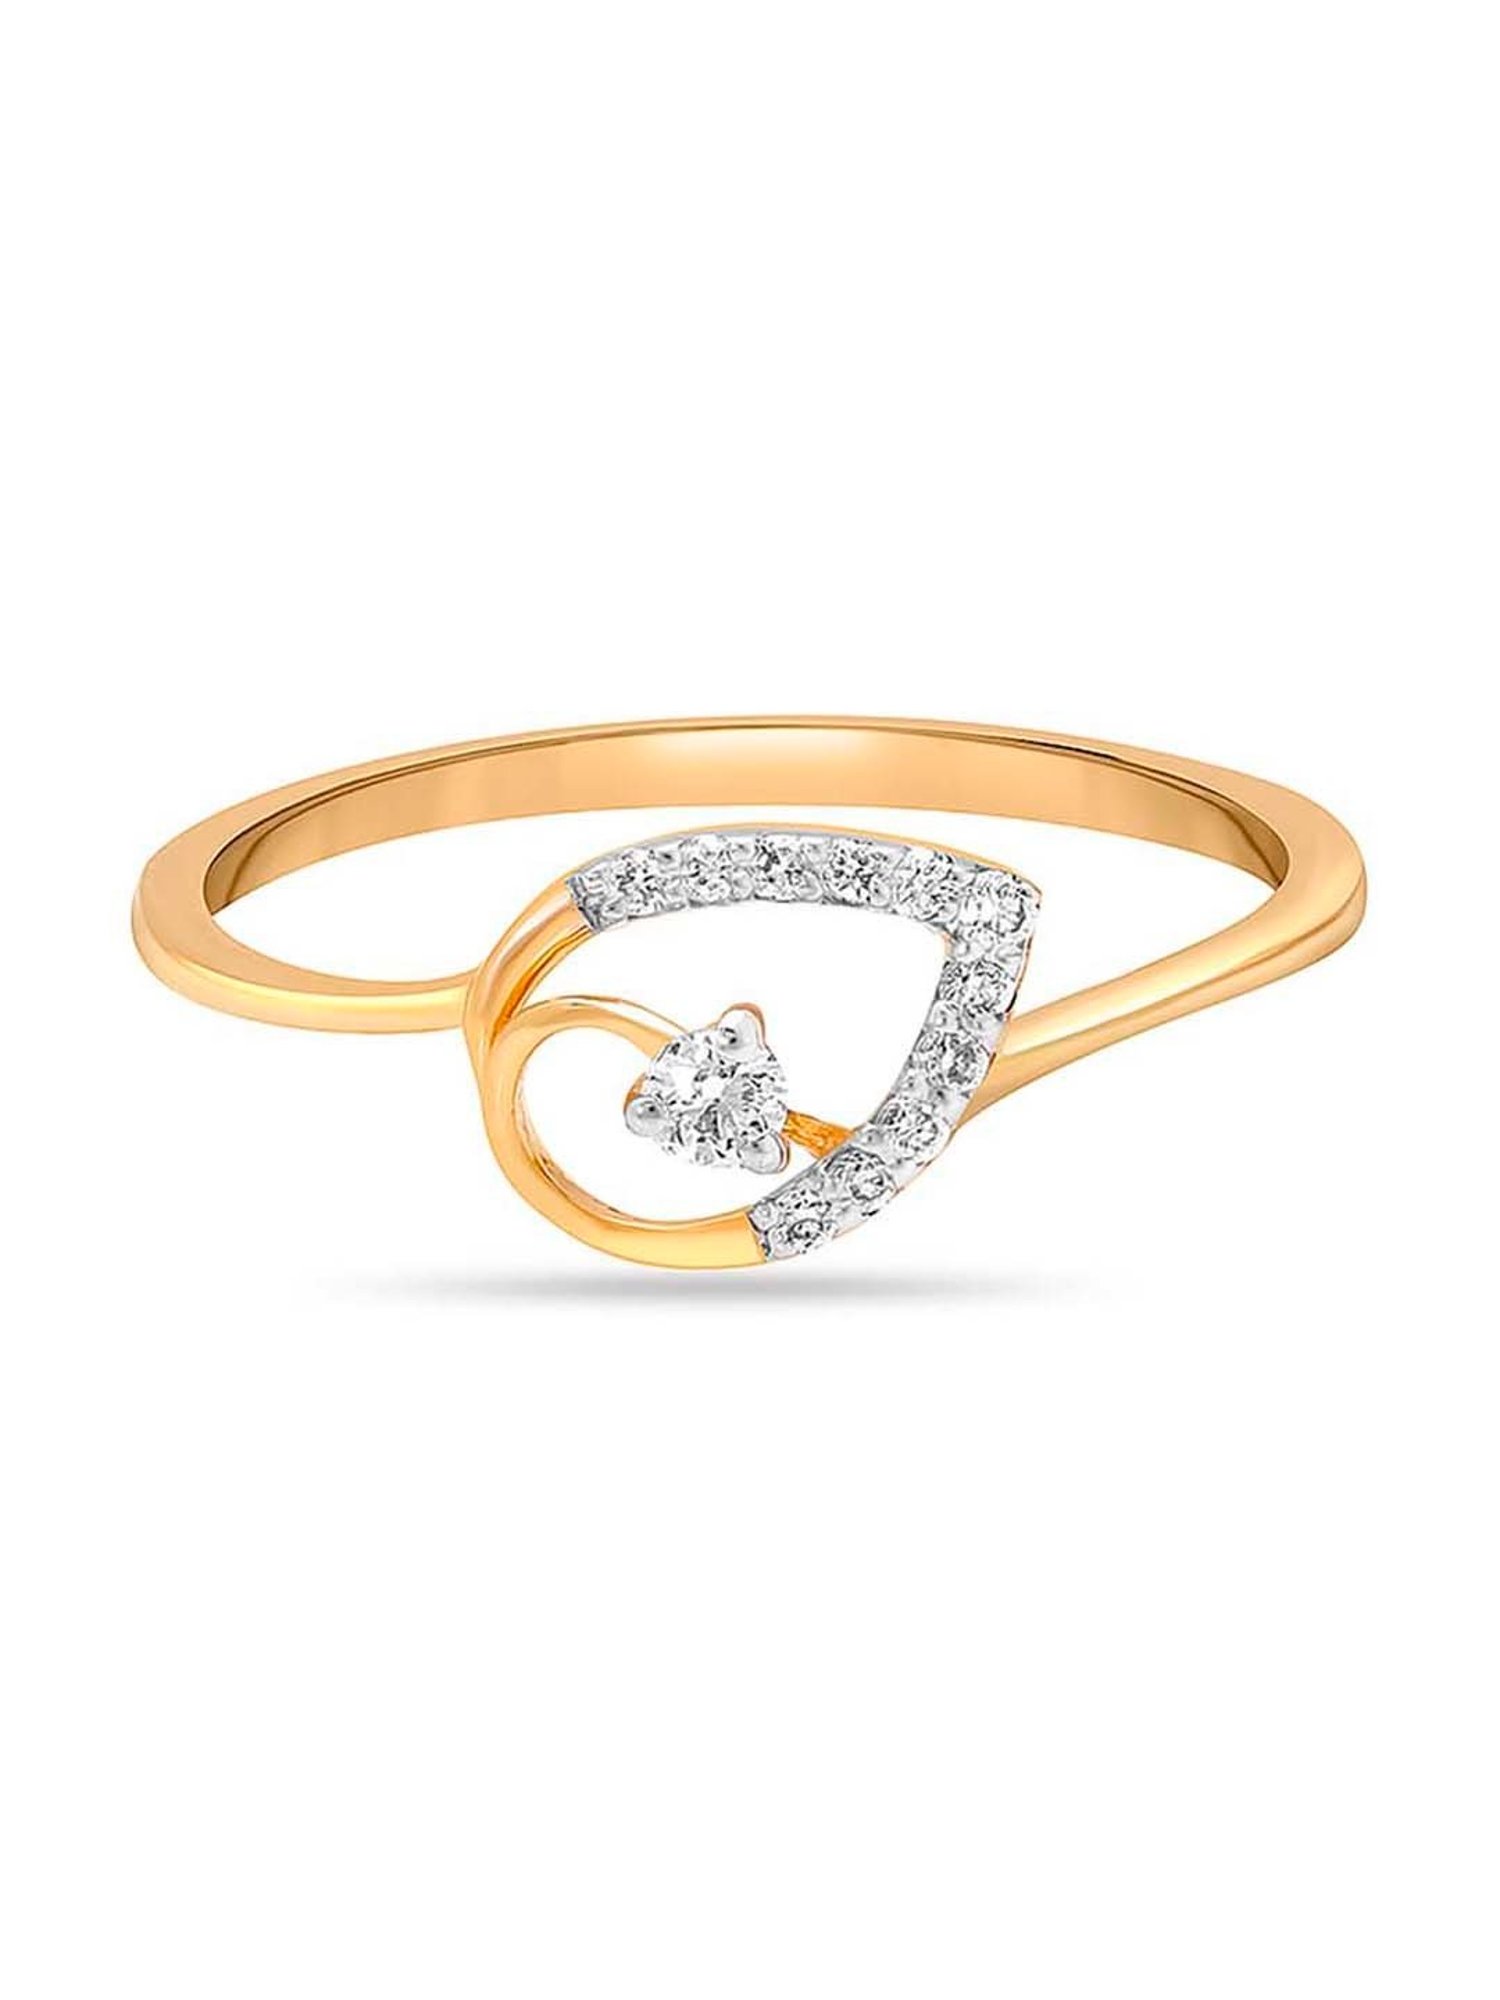 TANISHQ 18KT Gold and Diamond Ring 16.40 mm in Dindigul at best price by Om  Sri Viswakarma Gold Company - Justdial